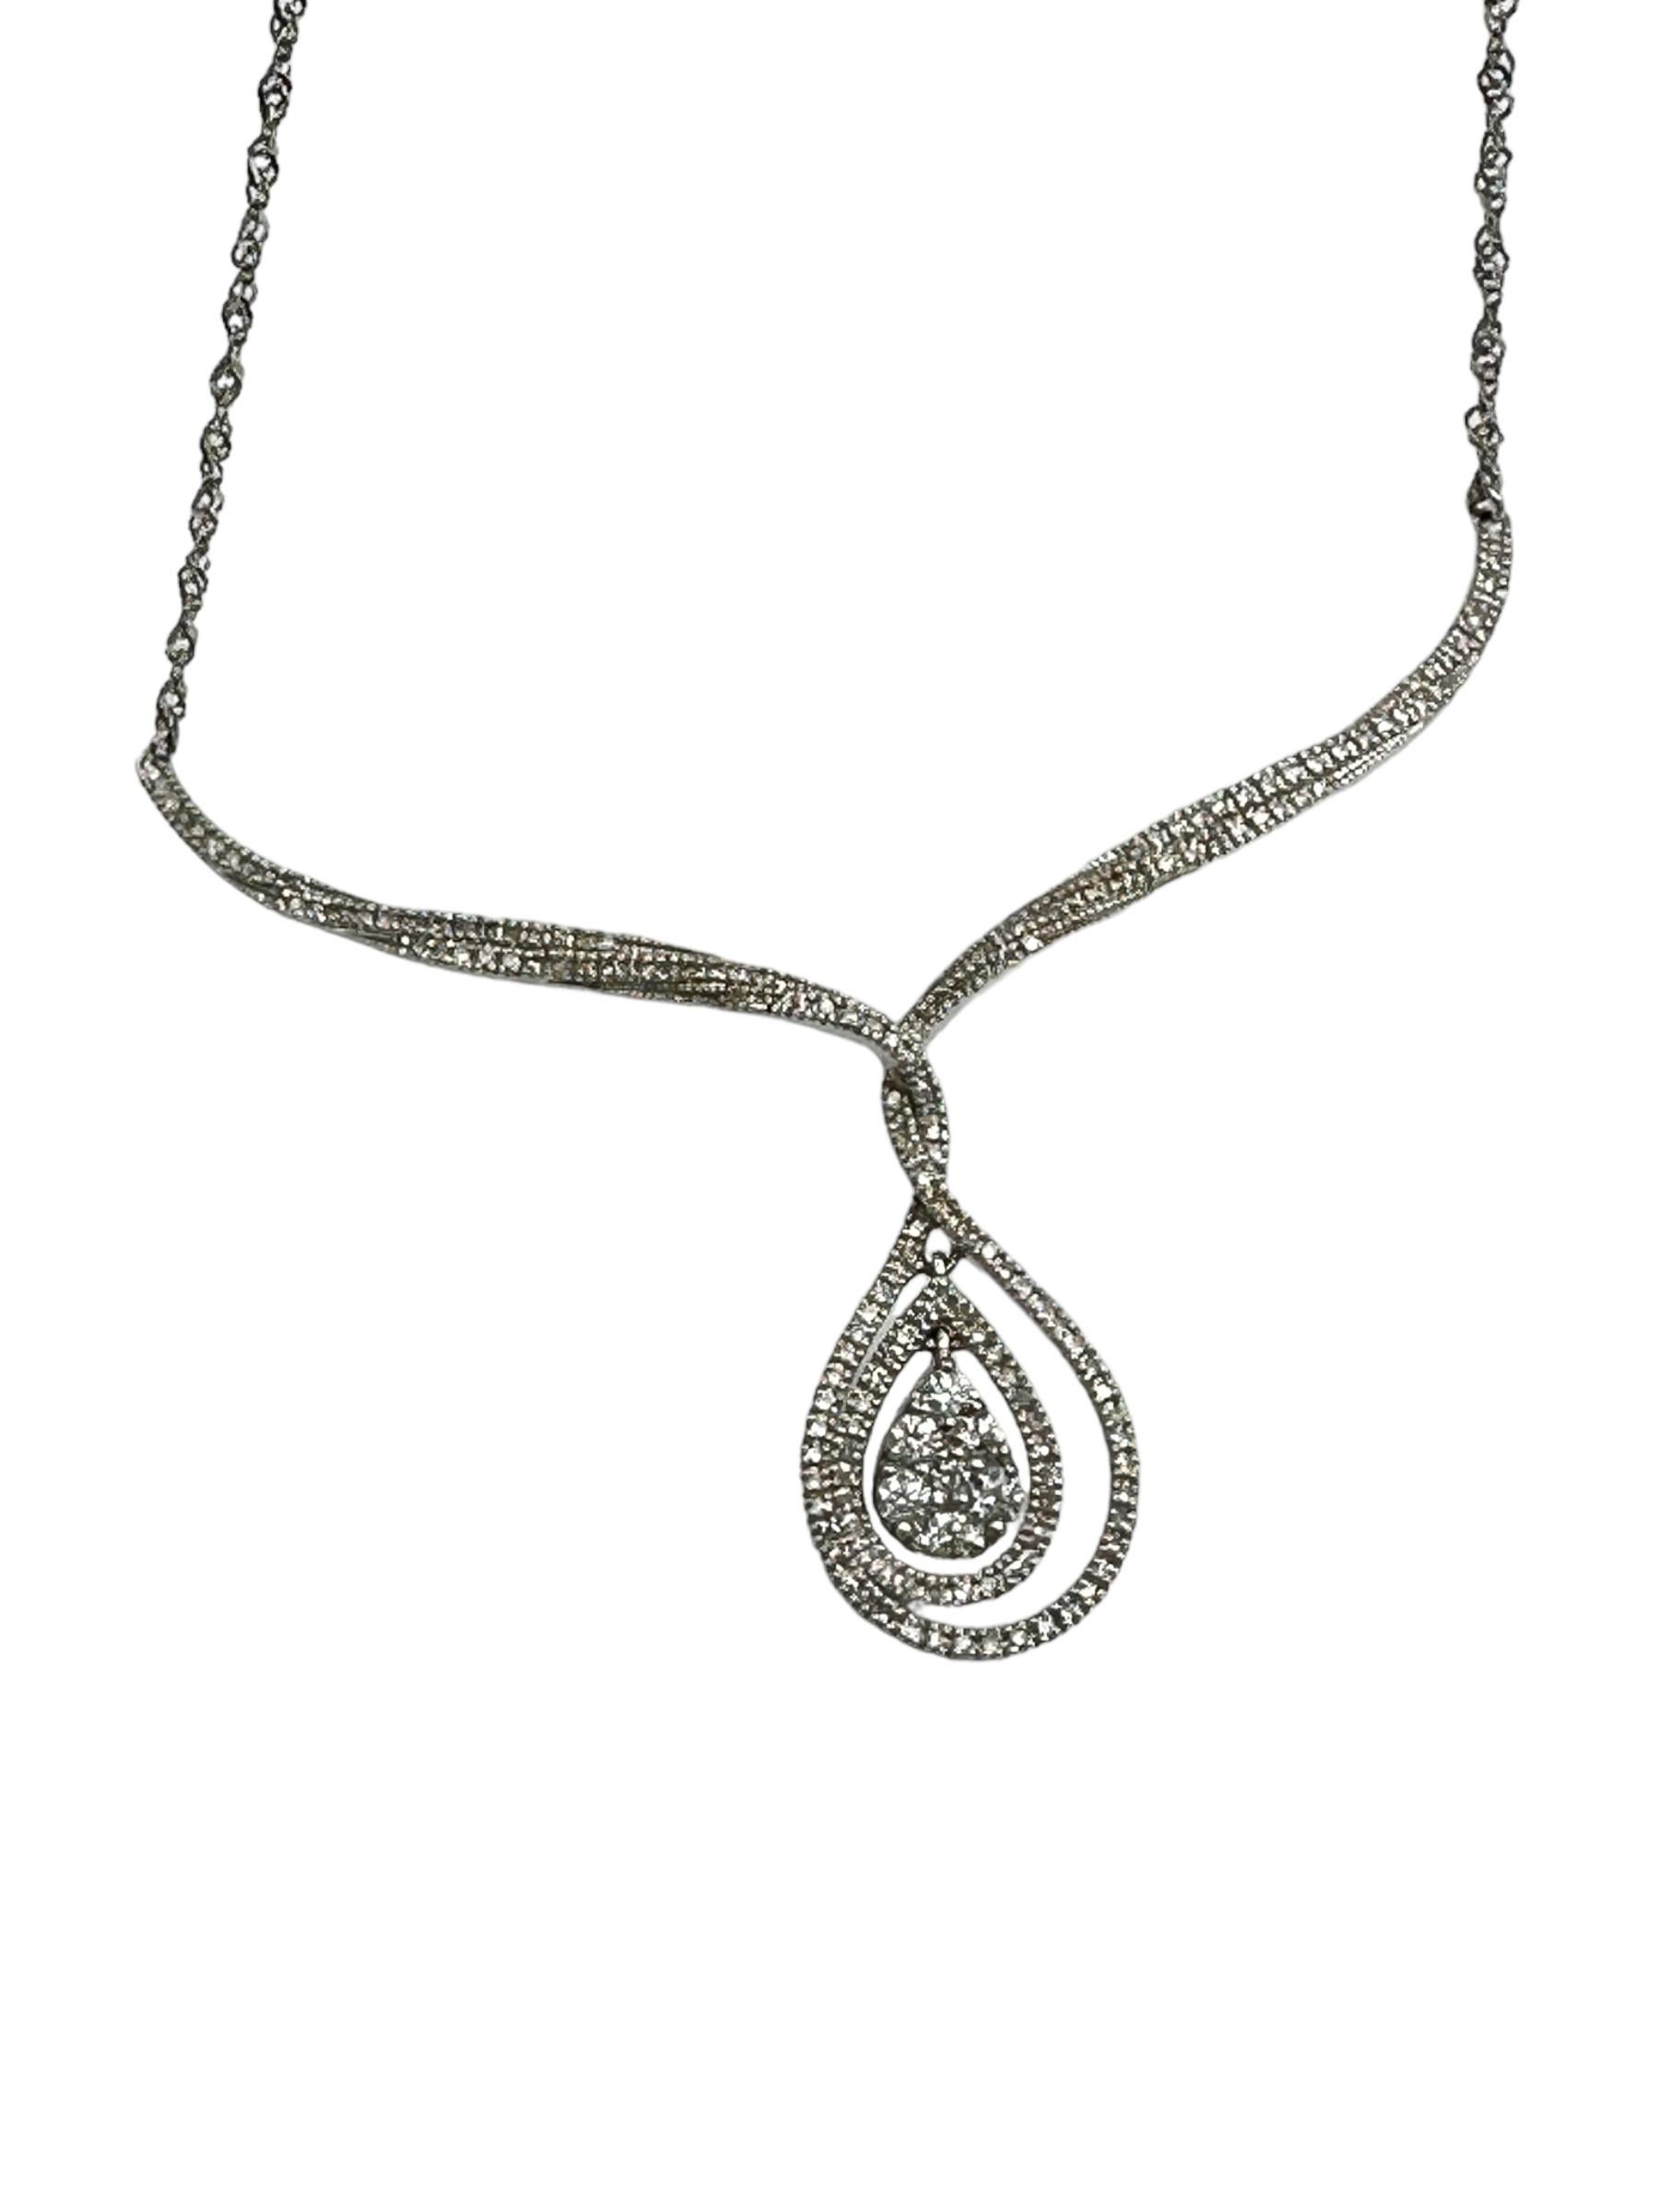 14K White Gold Double Halo 1.75 Carat Diamond Pave Necklace  In Excellent Condition For Sale In Laguna Hills, CA